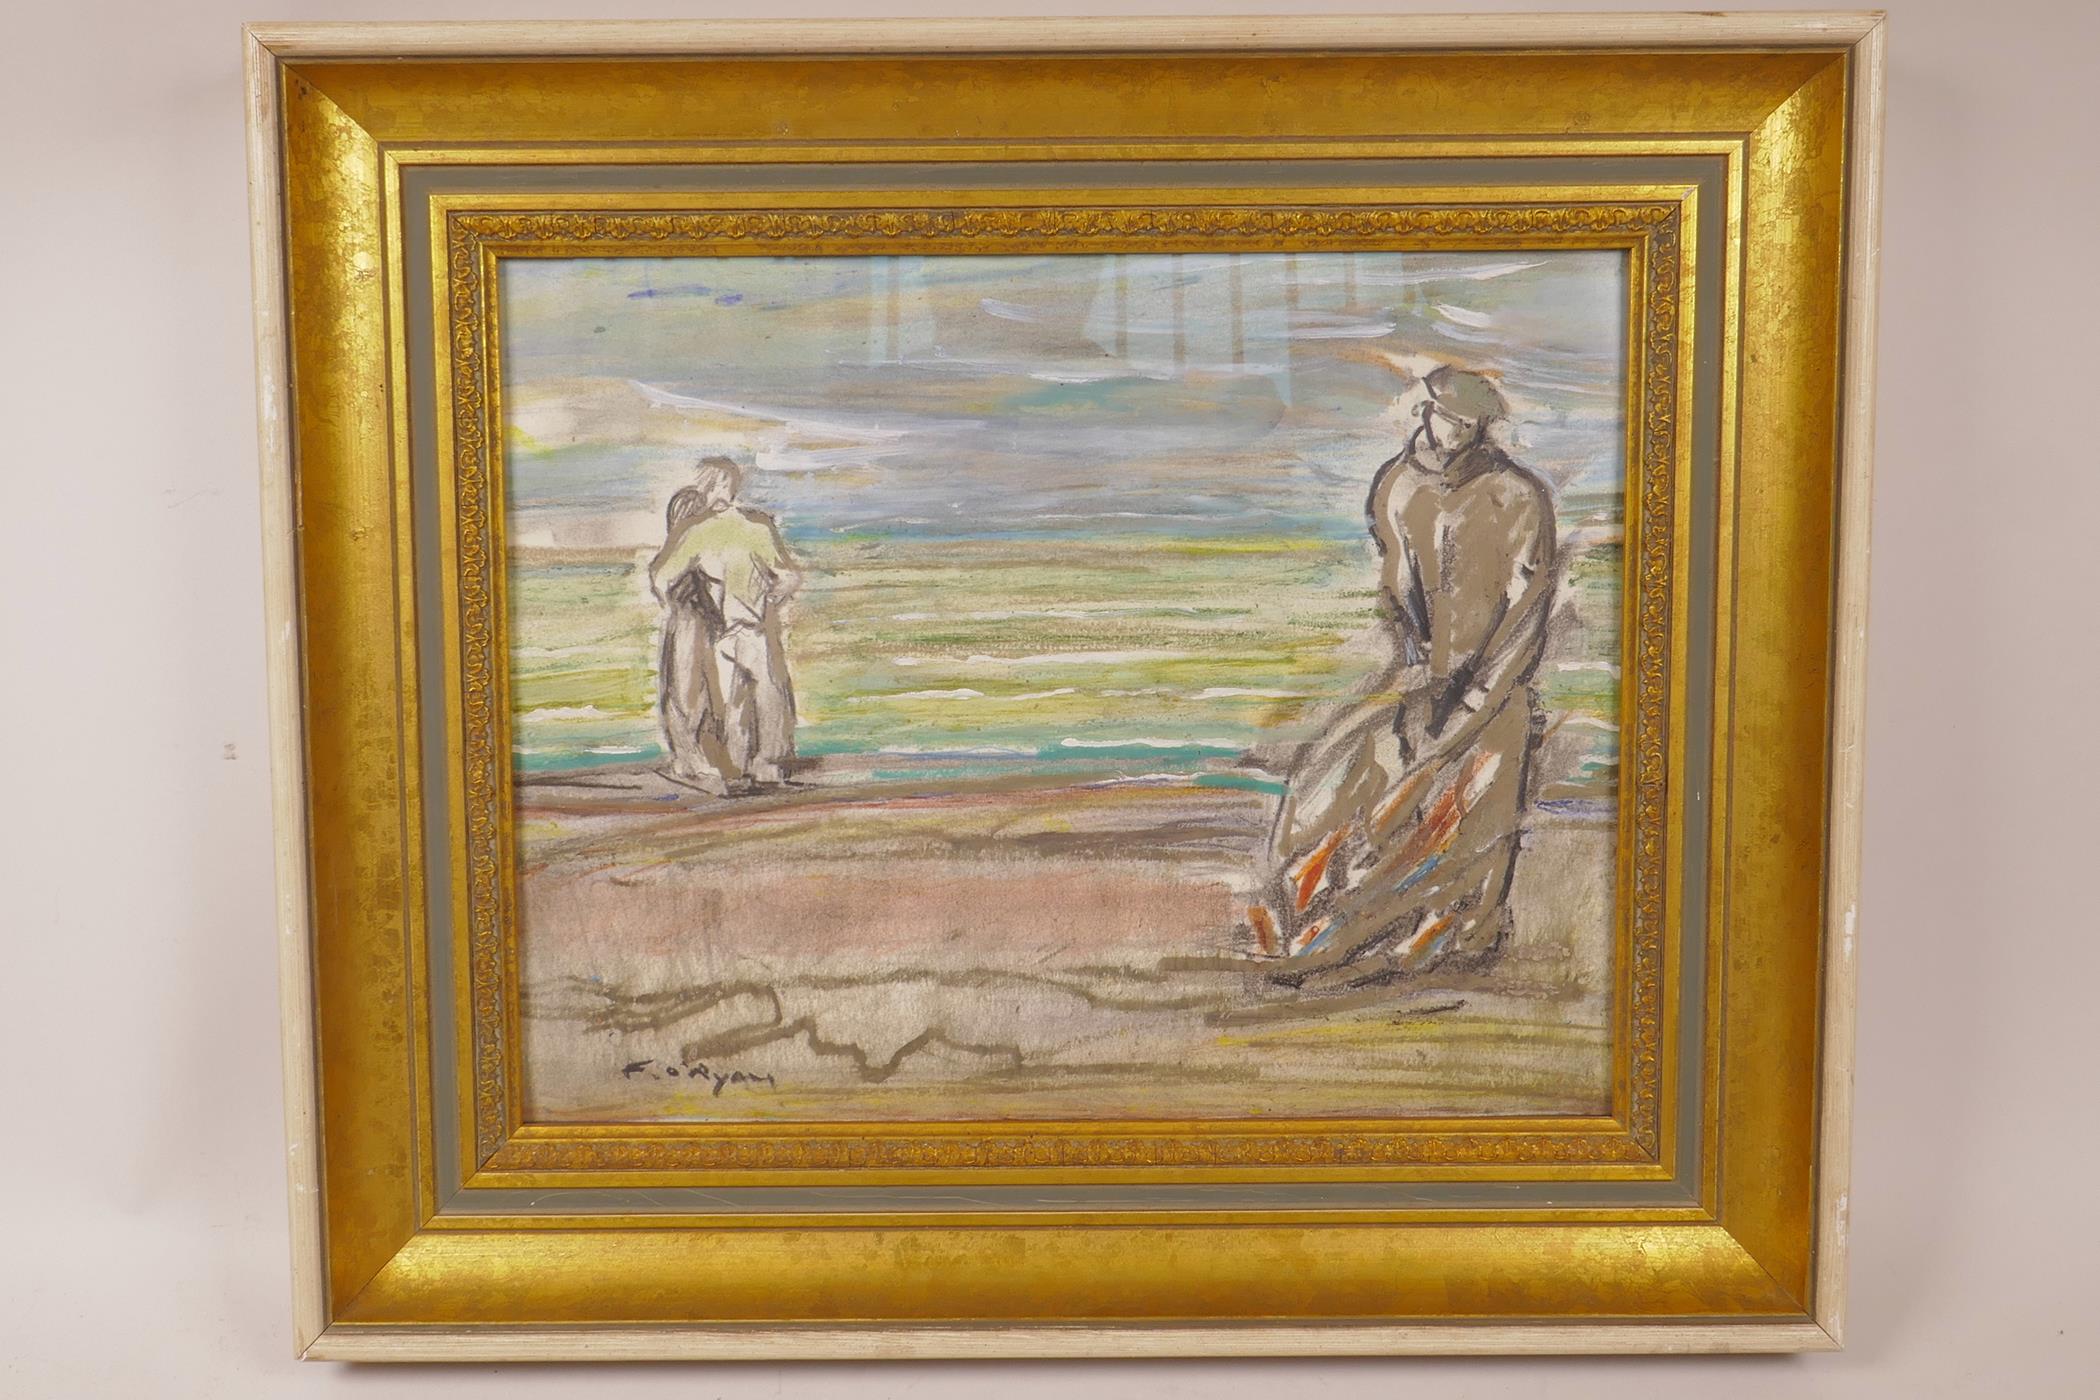 Attributed to Fergus O'Ryan, figures on a beach, signed F. O'Ryan, mixed media, 9½" x 12½" - Image 2 of 4